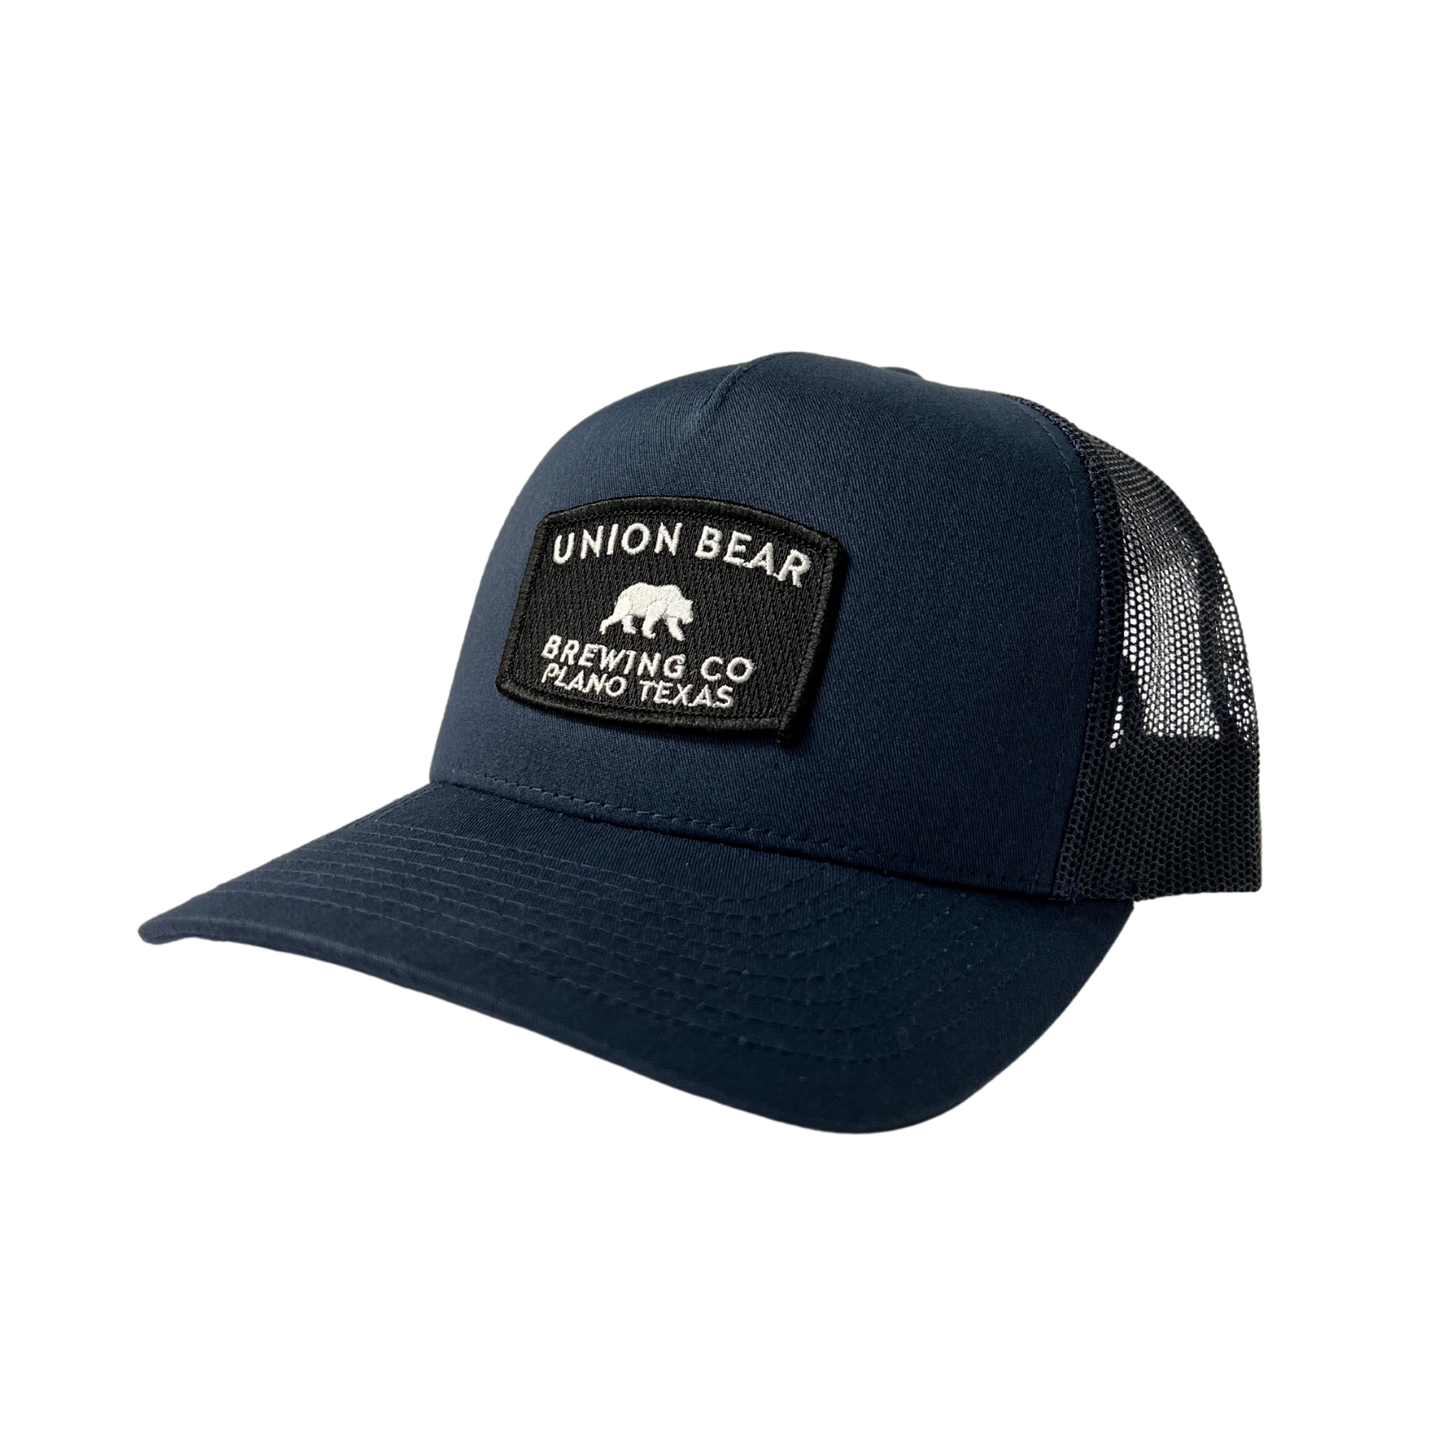 Brewing Co Patch Trucker Hat - Navy